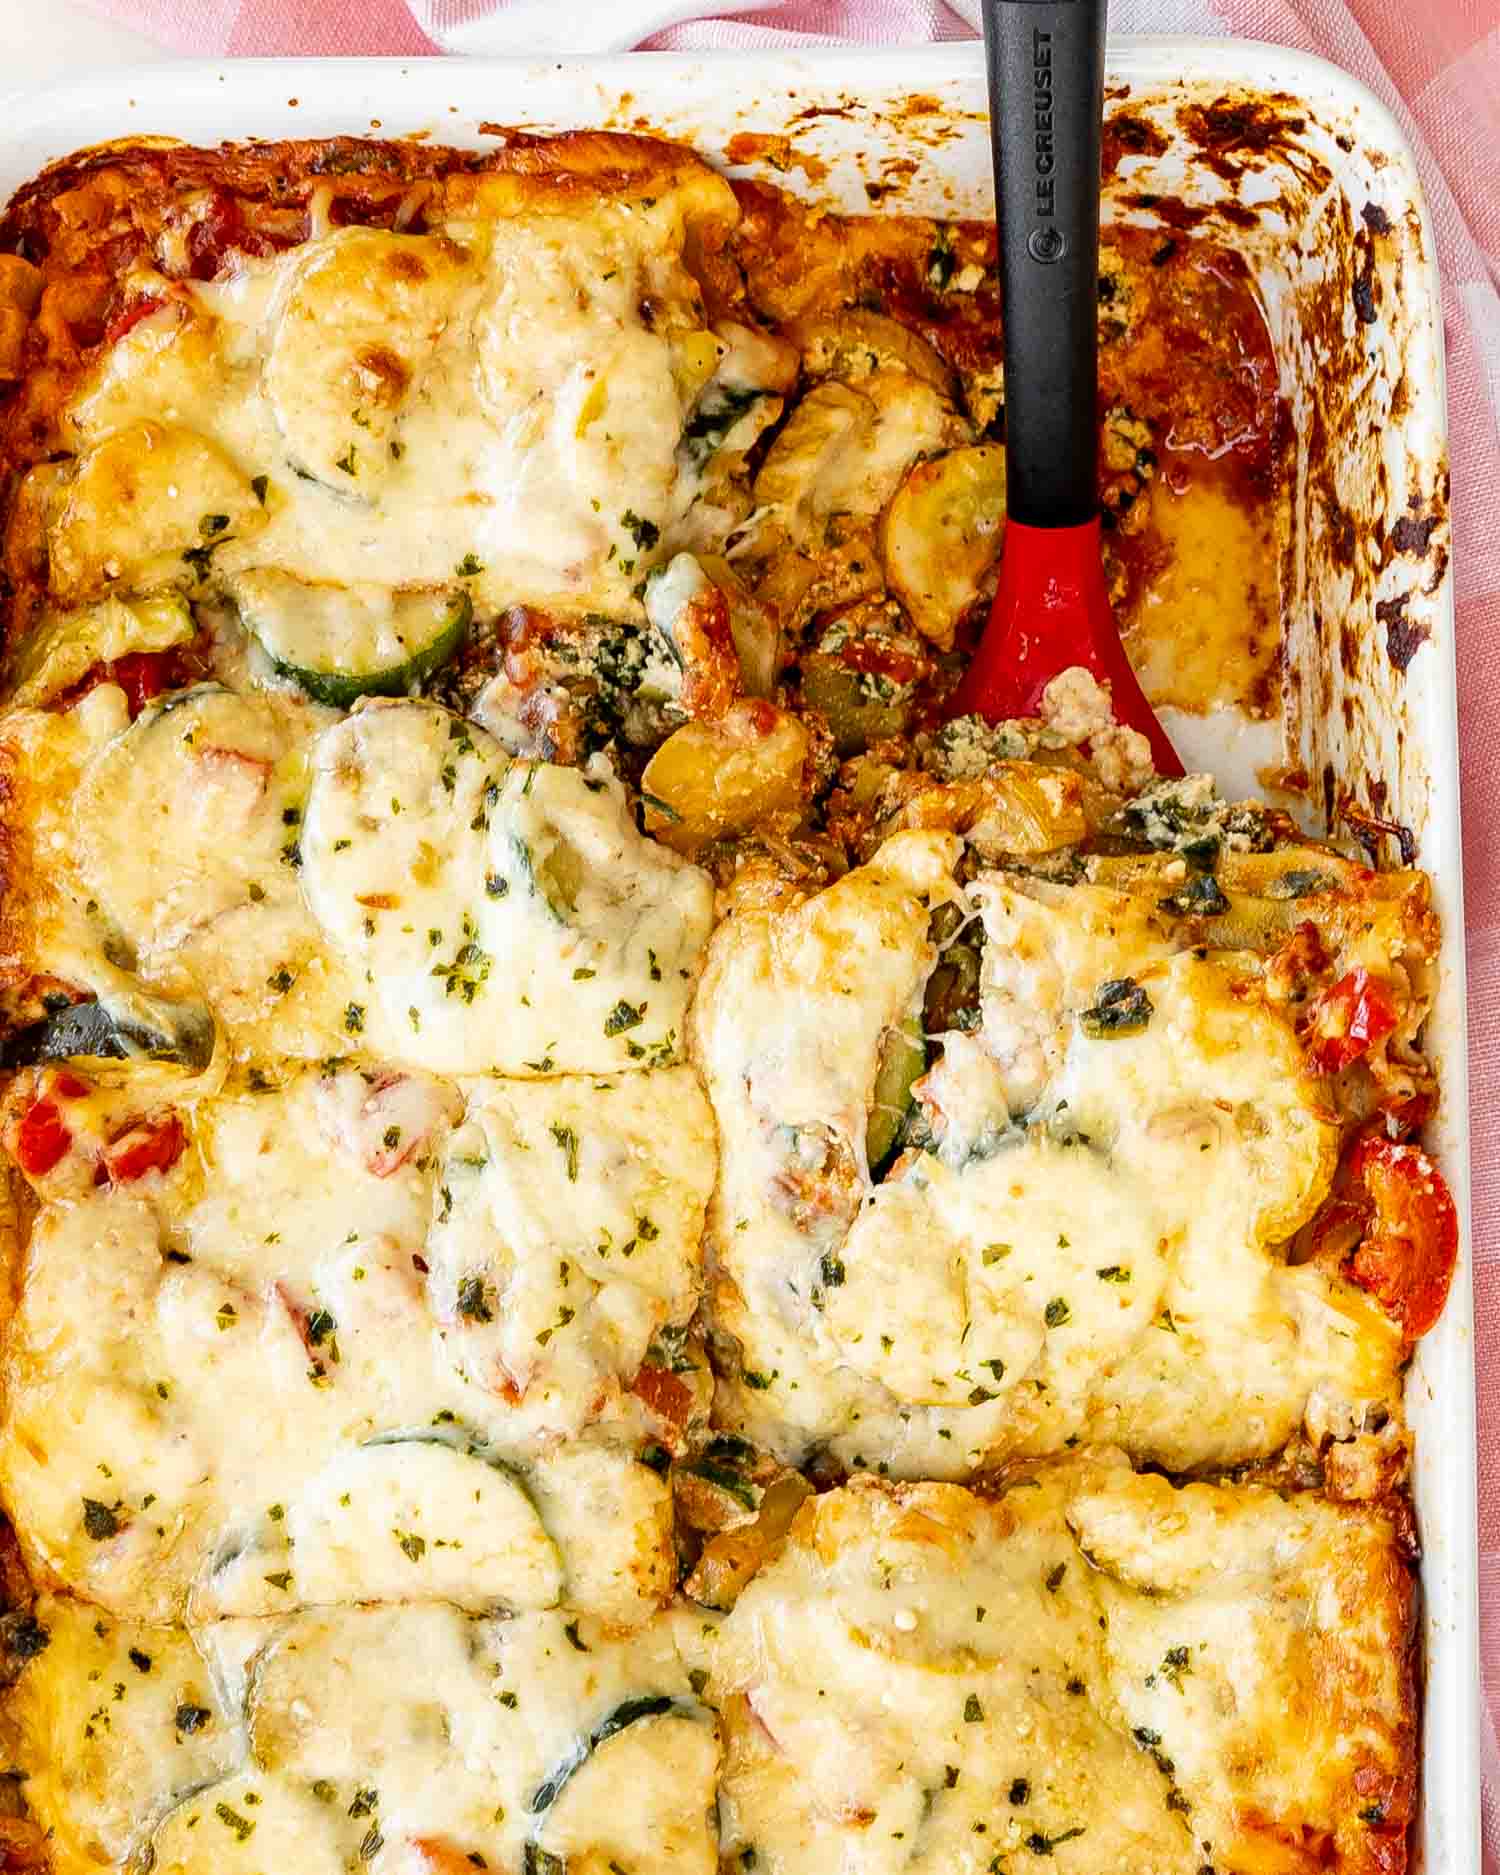 vegetable lasagna in a casserole dish fresh out of the oven.